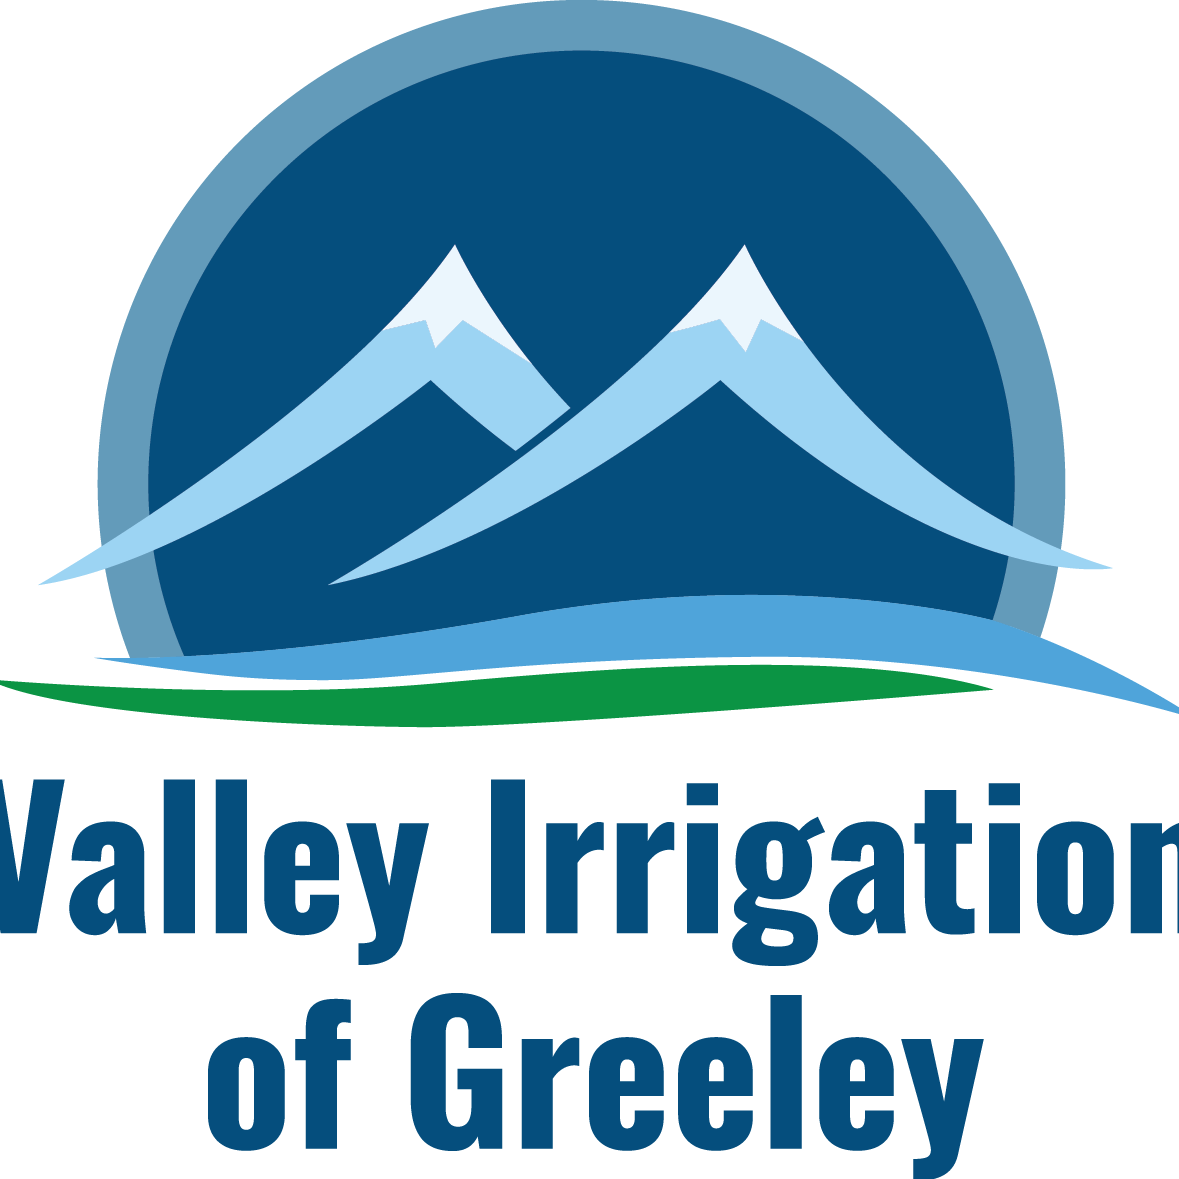 Valley Irrigation Of Greeley - Greeley, CO 80631 - (970)351-7930 | ShowMeLocal.com